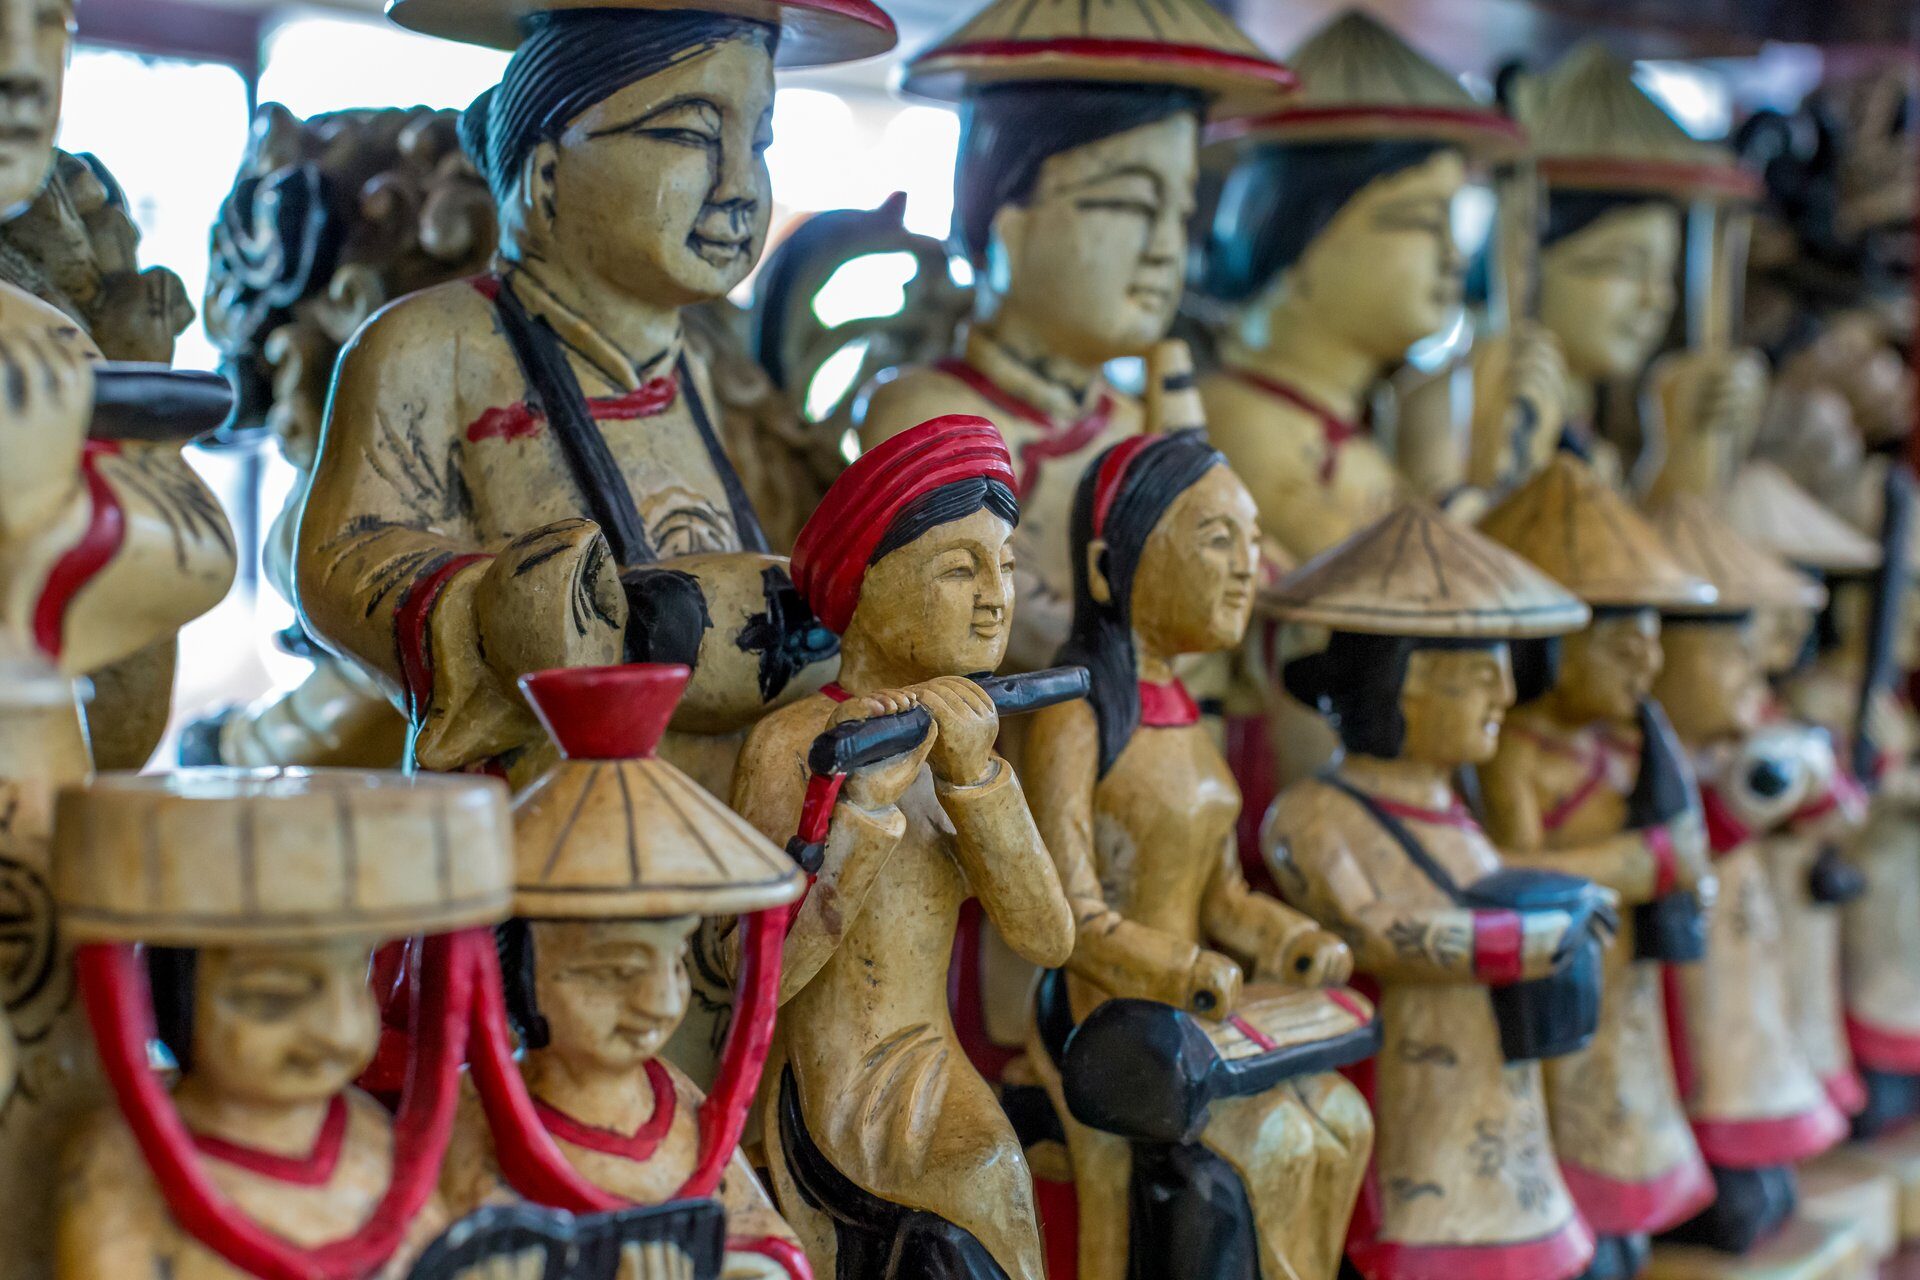 Souvenirs] Popular souvenirs of Vietnam that you can buy in Phu